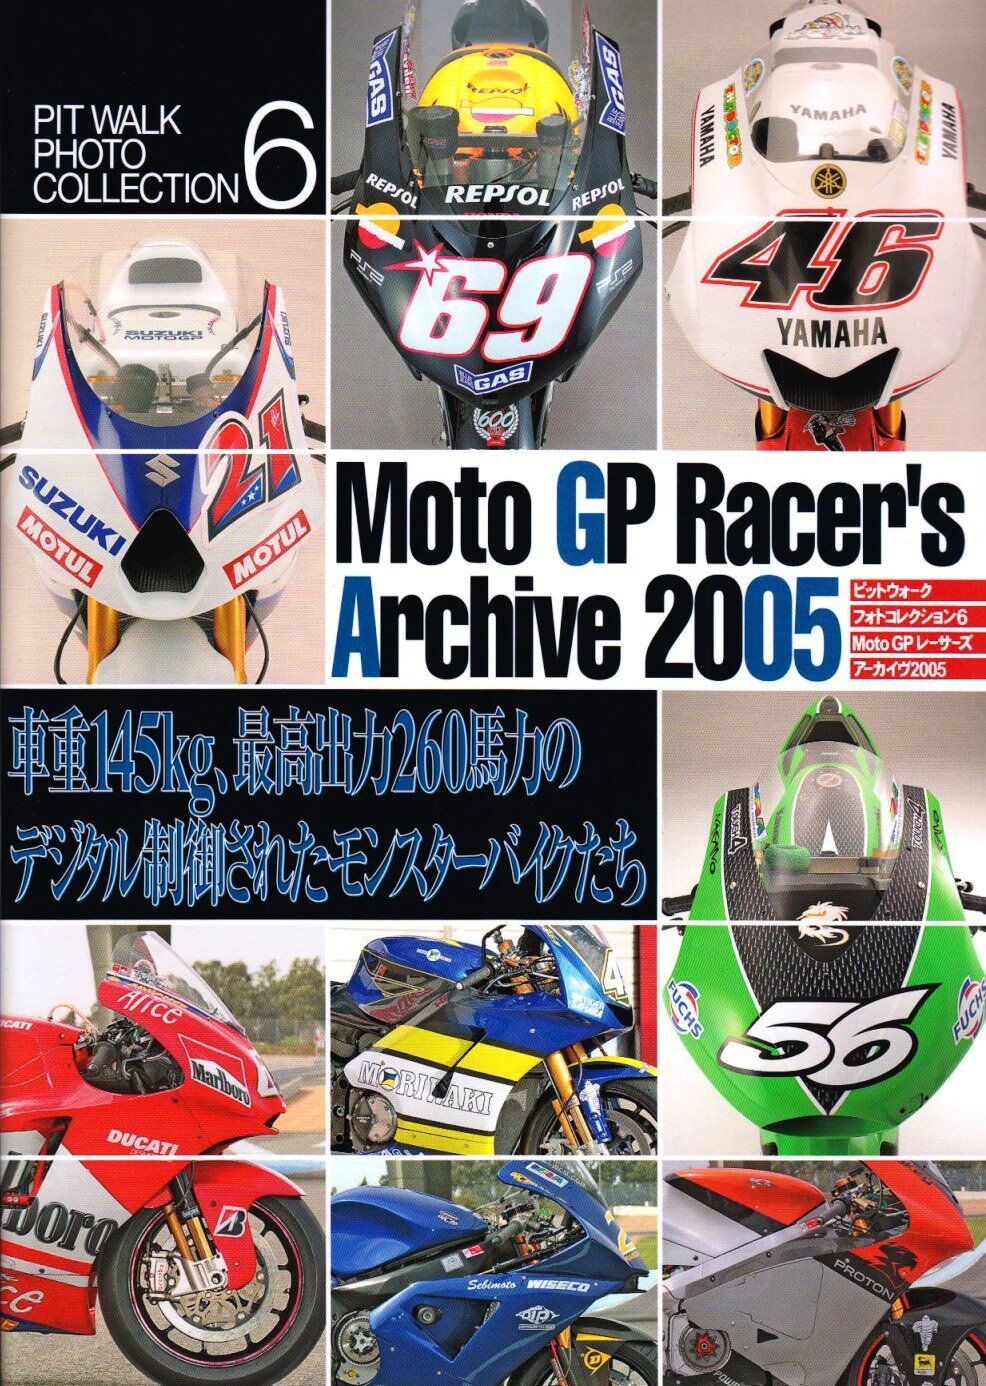 Moto GP Racer's Archive 2005 Photo Collection Book